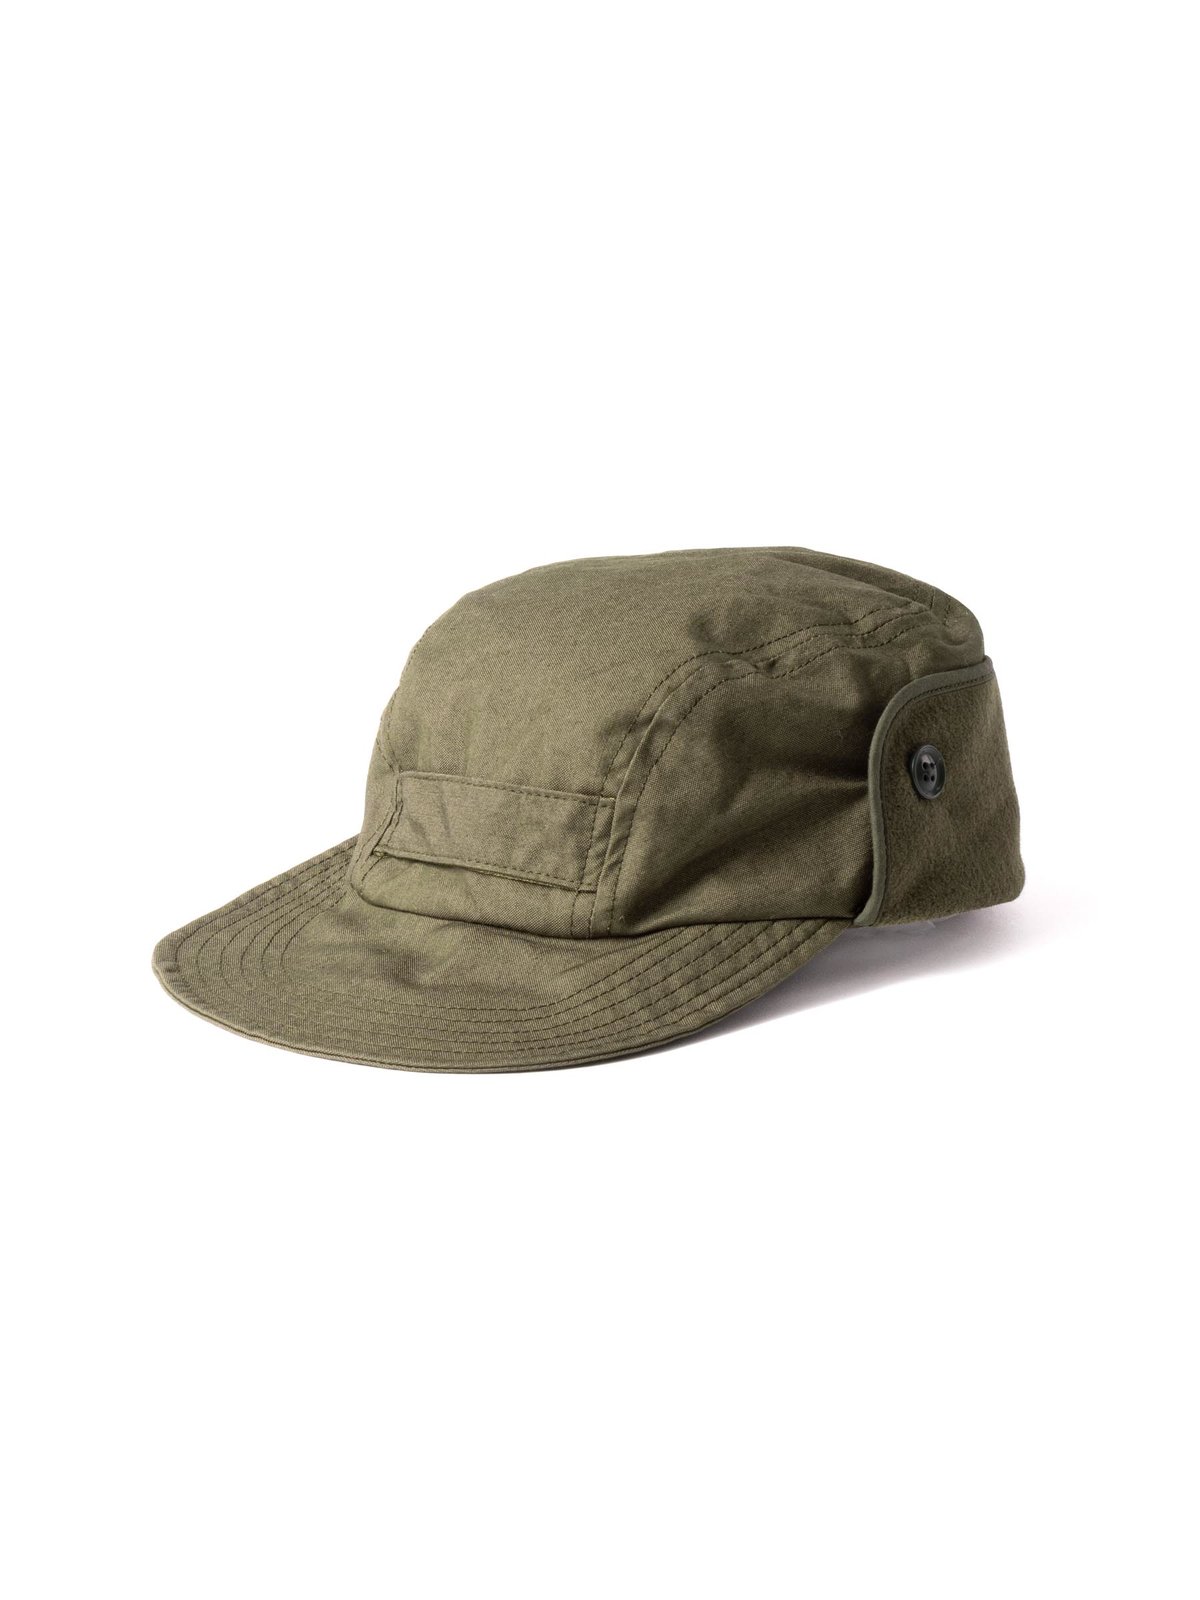 HUNTER'S CAP OLIVE CP WEATHER POPLIN by Engineered Garments – The